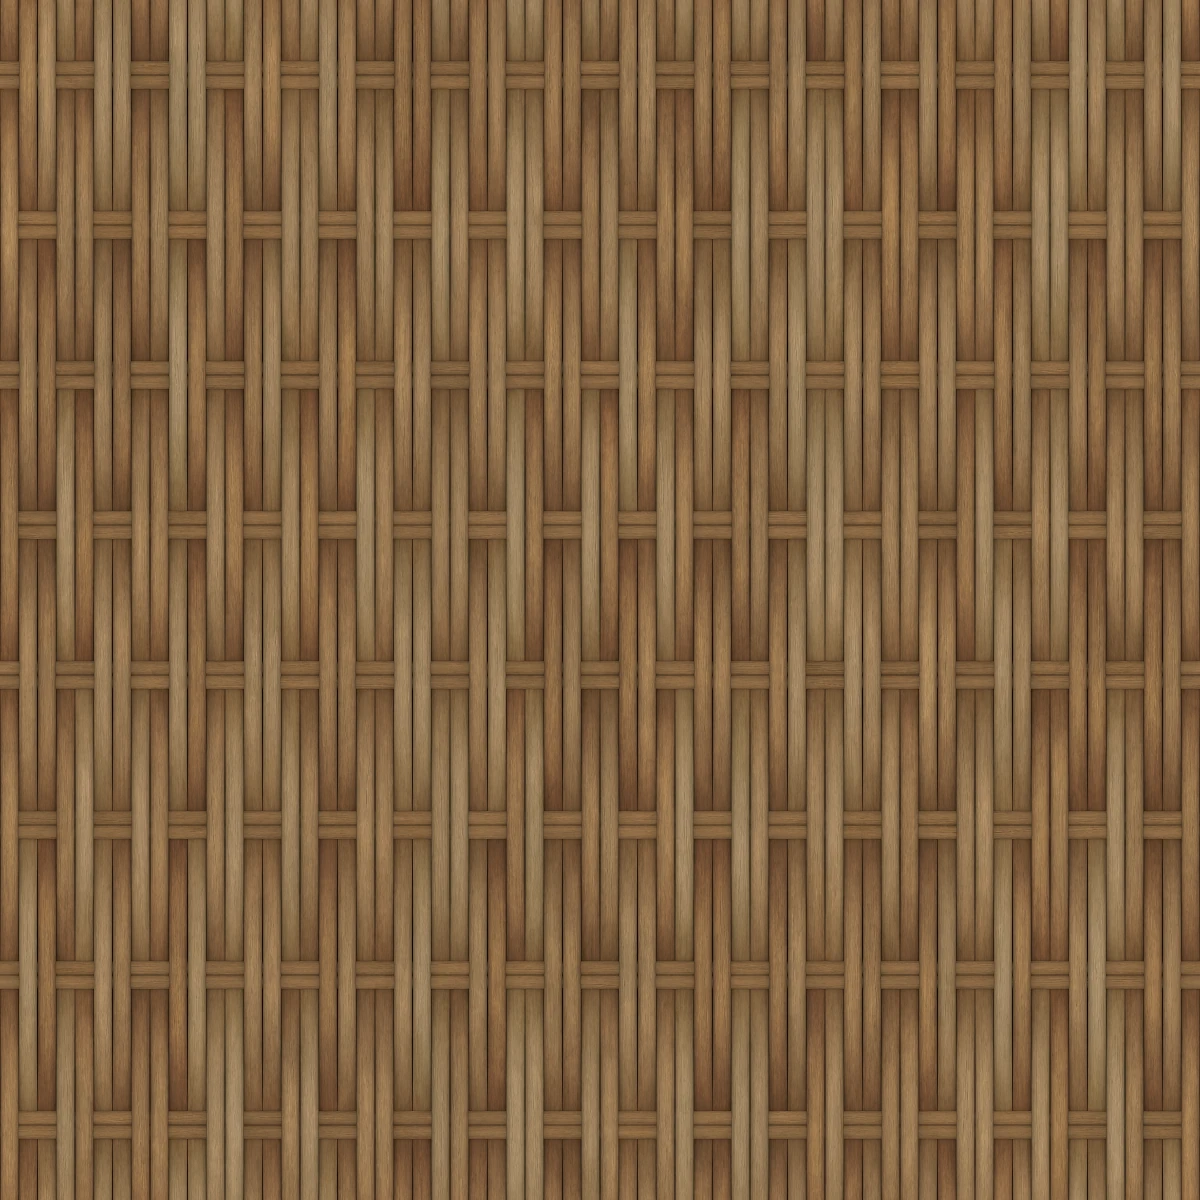 Woven Fence PBR Texture